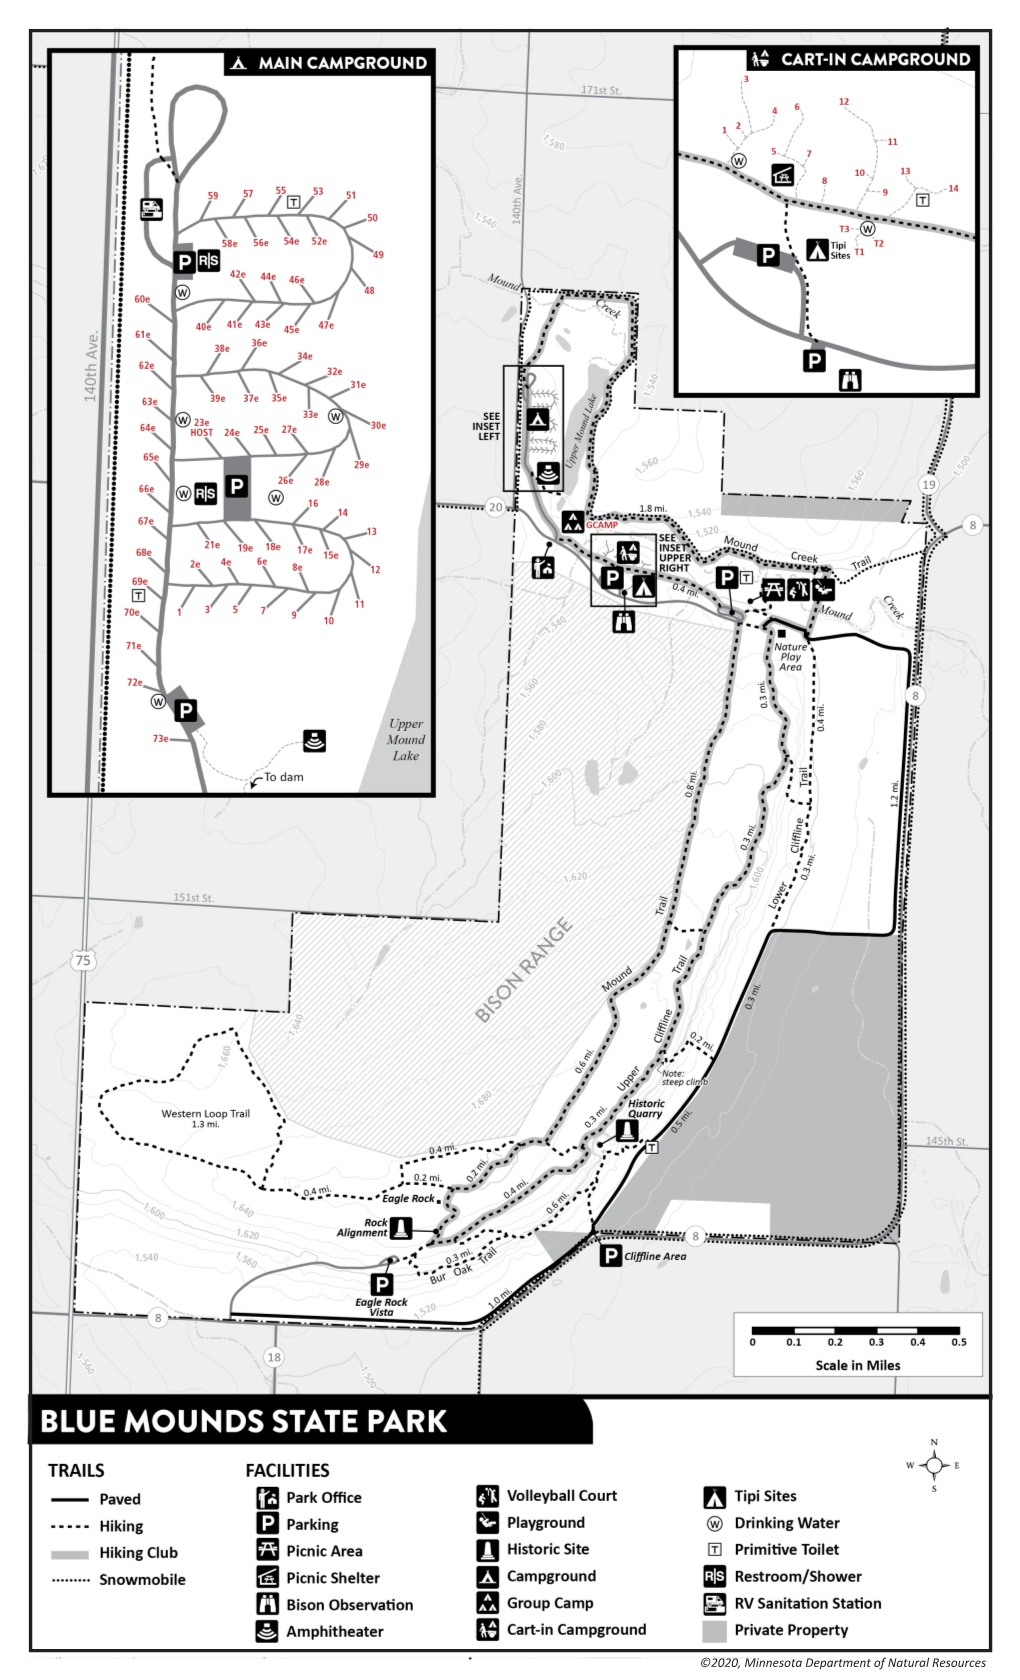 Map of Blue Mounds State Park Trails and Facilities